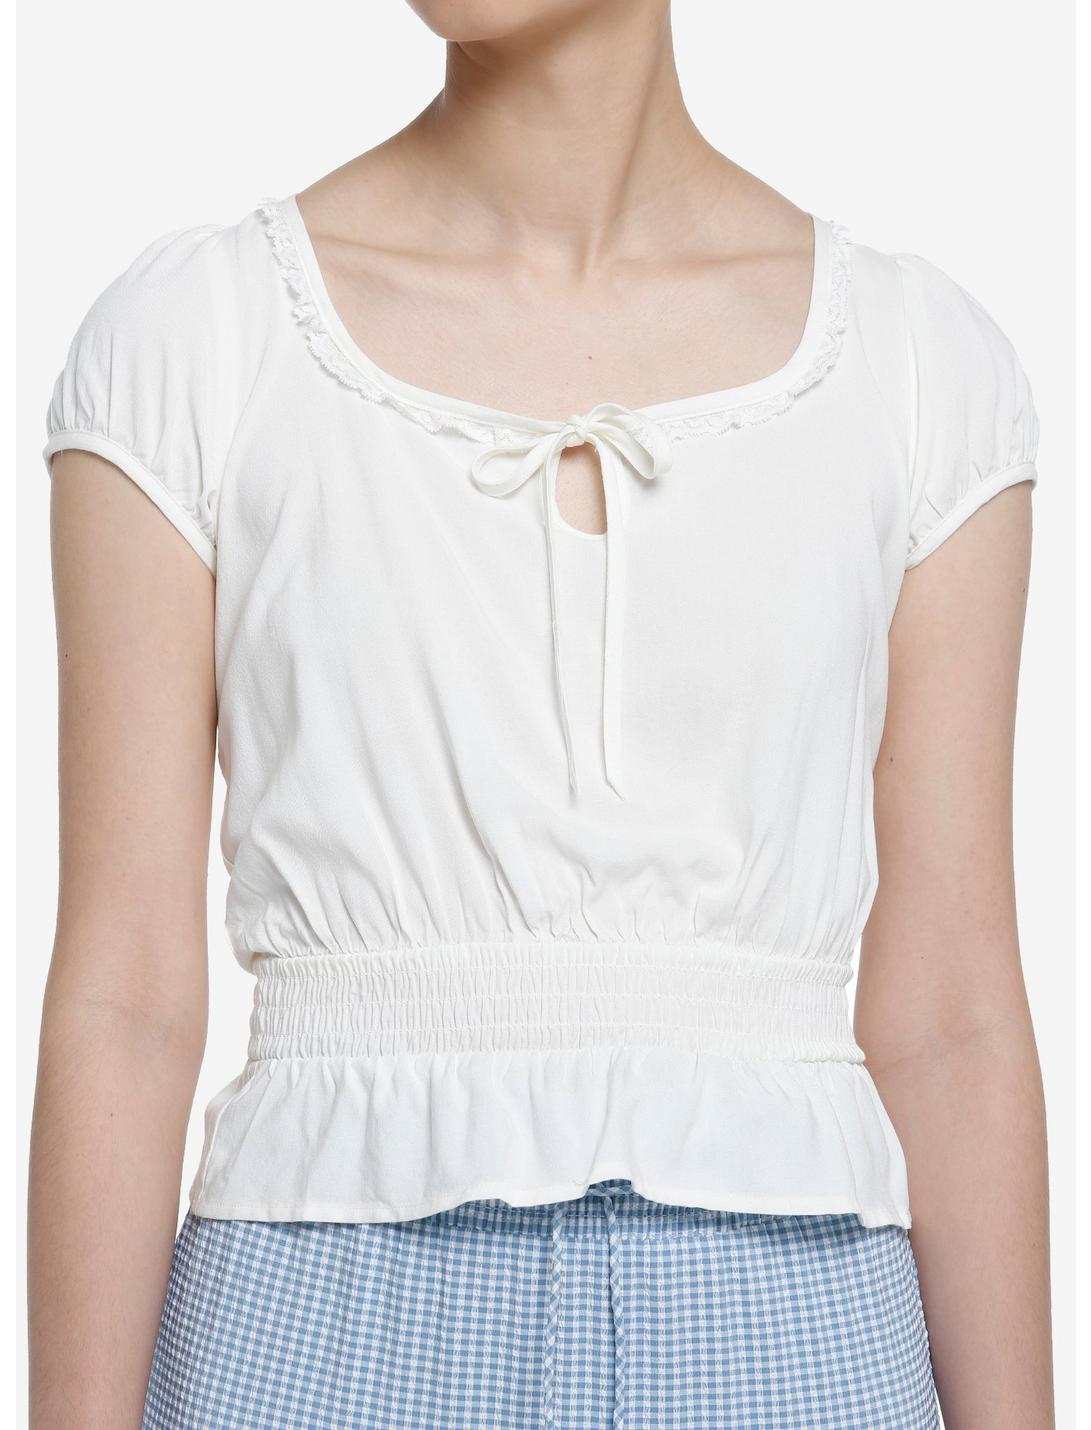 Thorn & Fable Ivory Smock Girls Crop Top, IVORY, hi-res